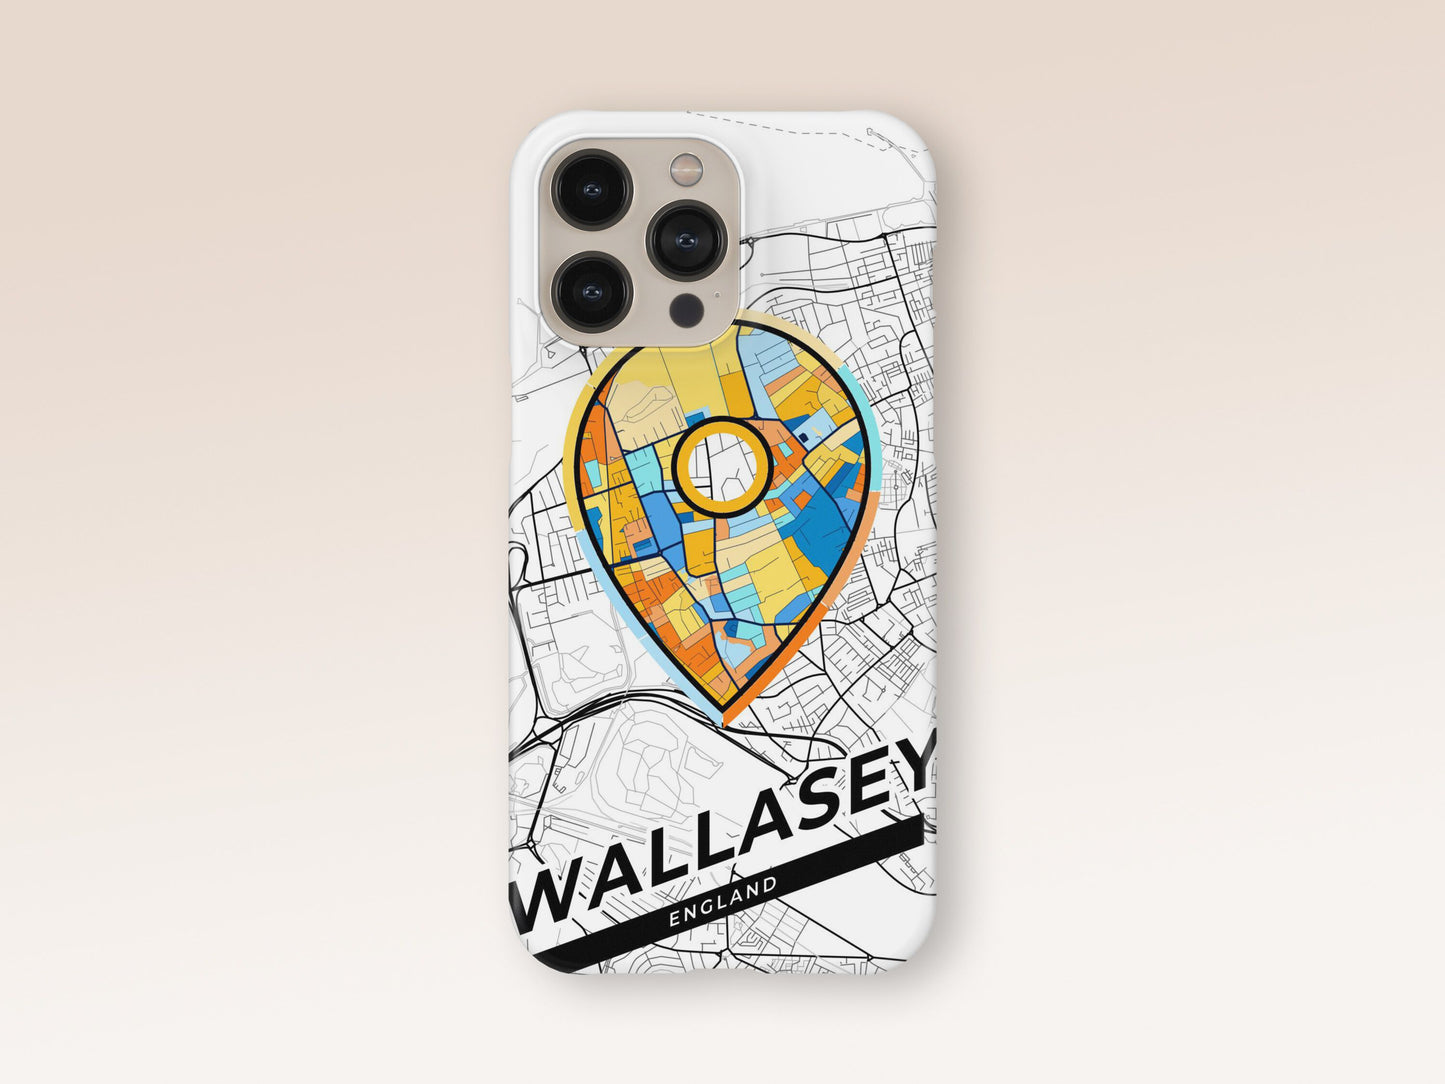 Wallasey England slim phone case with colorful icon 1